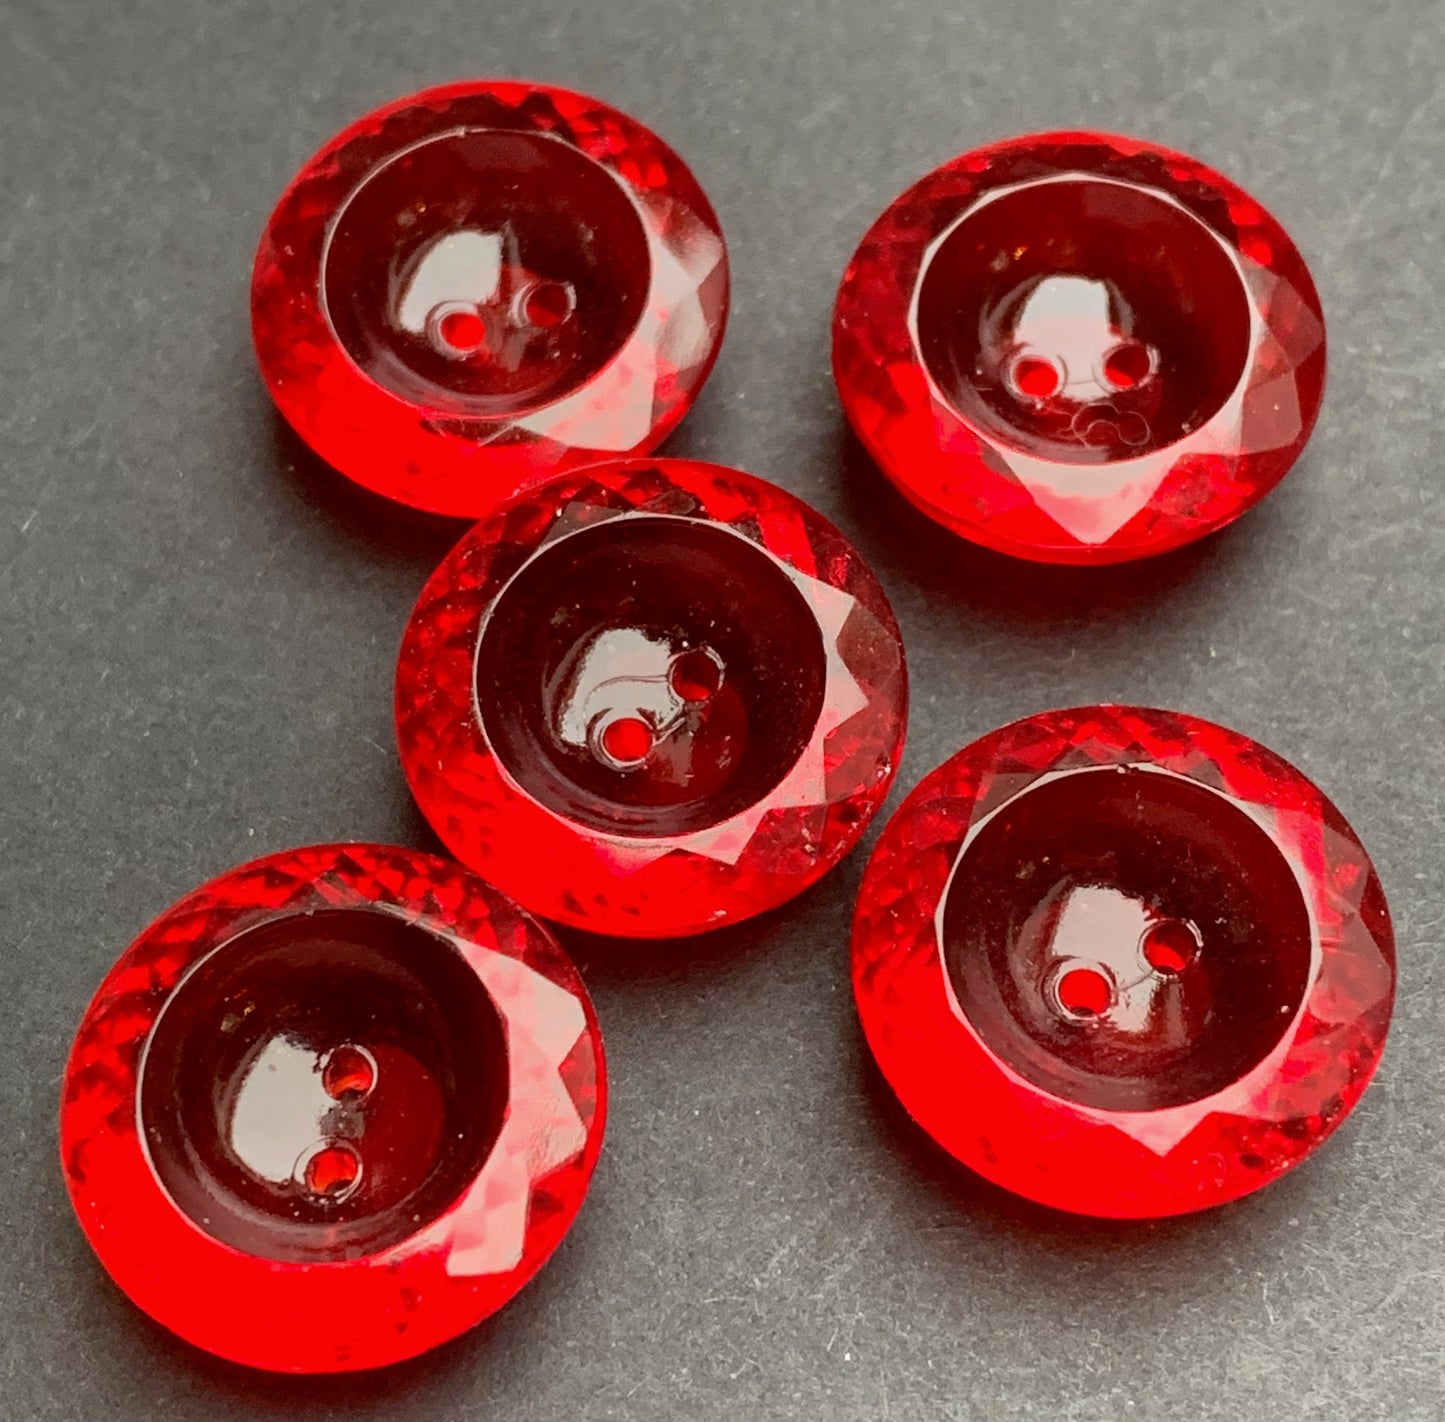 6 Deep Red Twinkly 1930s Red Glass Buttons - 11mm and 14mm wide